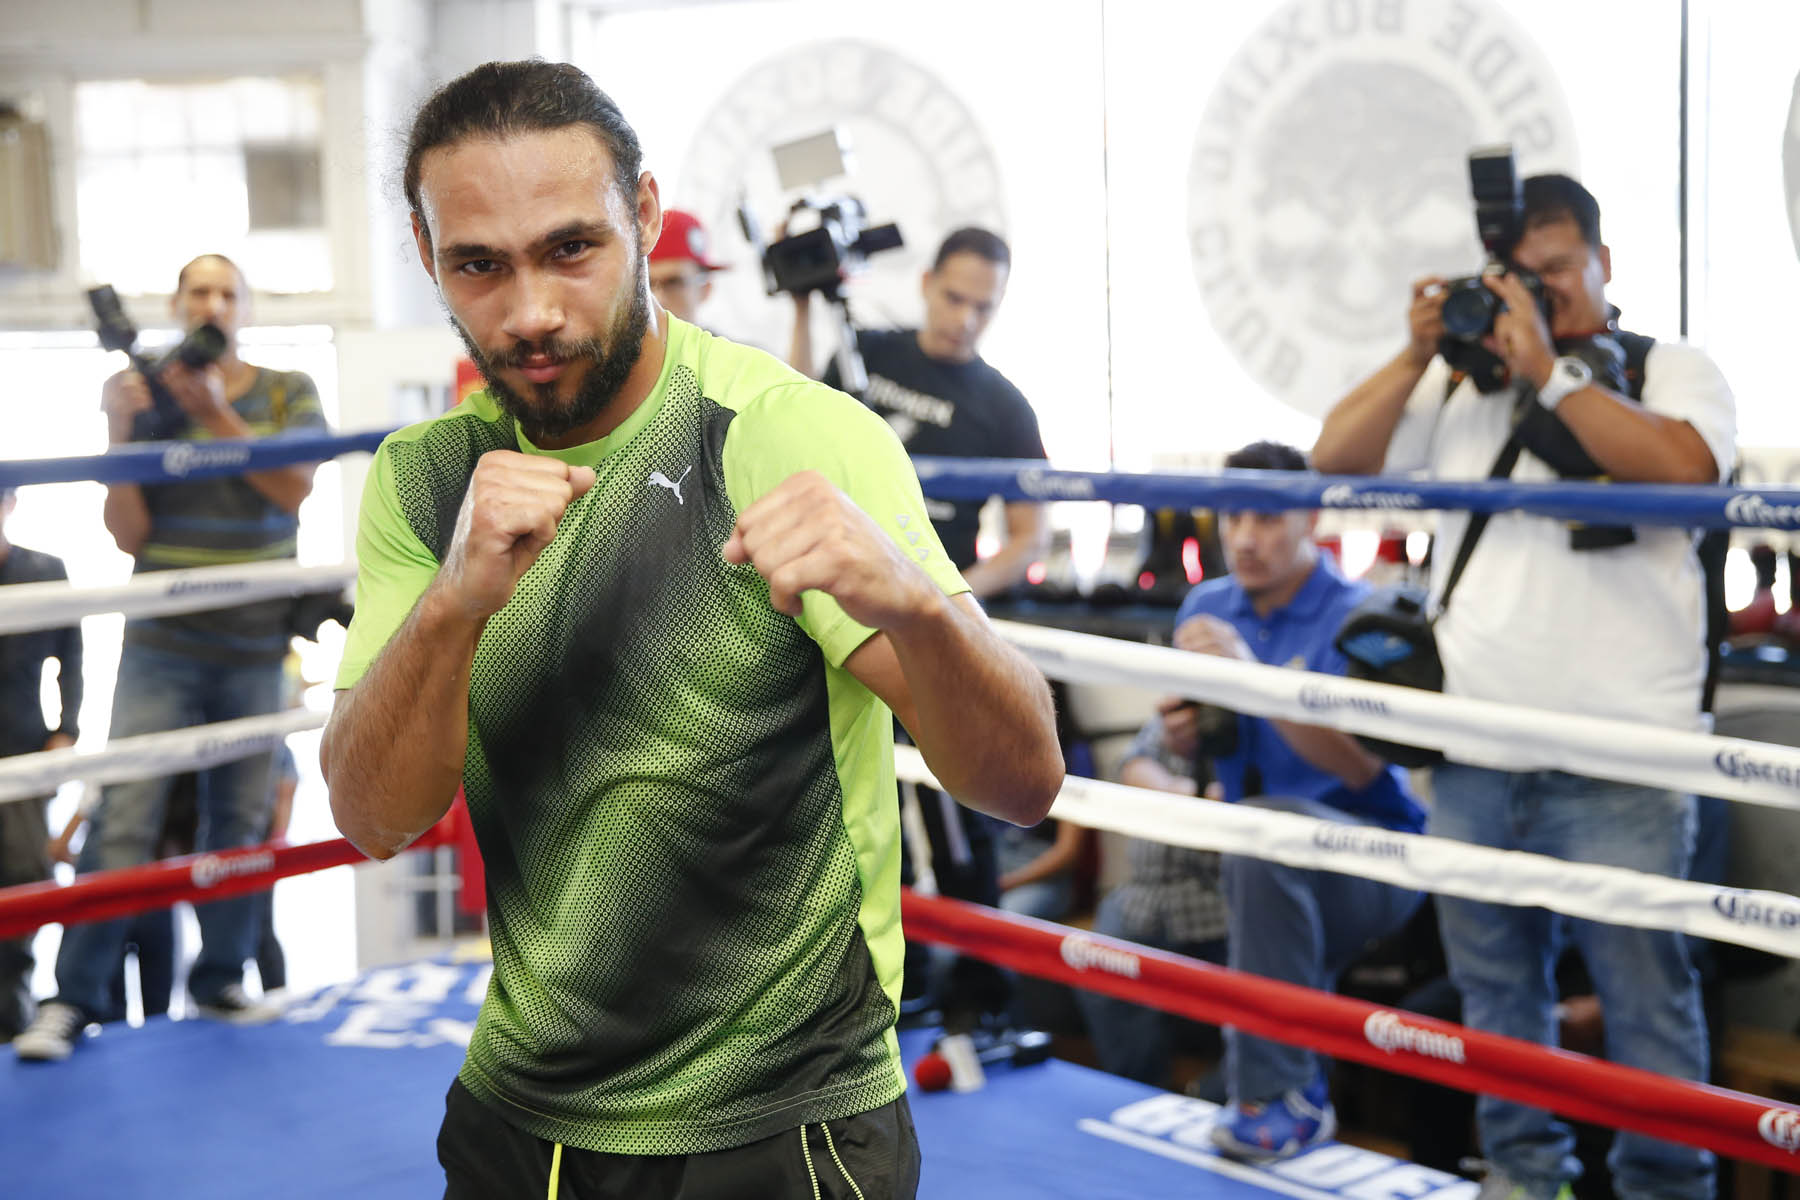 Thurman Made a Statement, but What Now for the Champ?